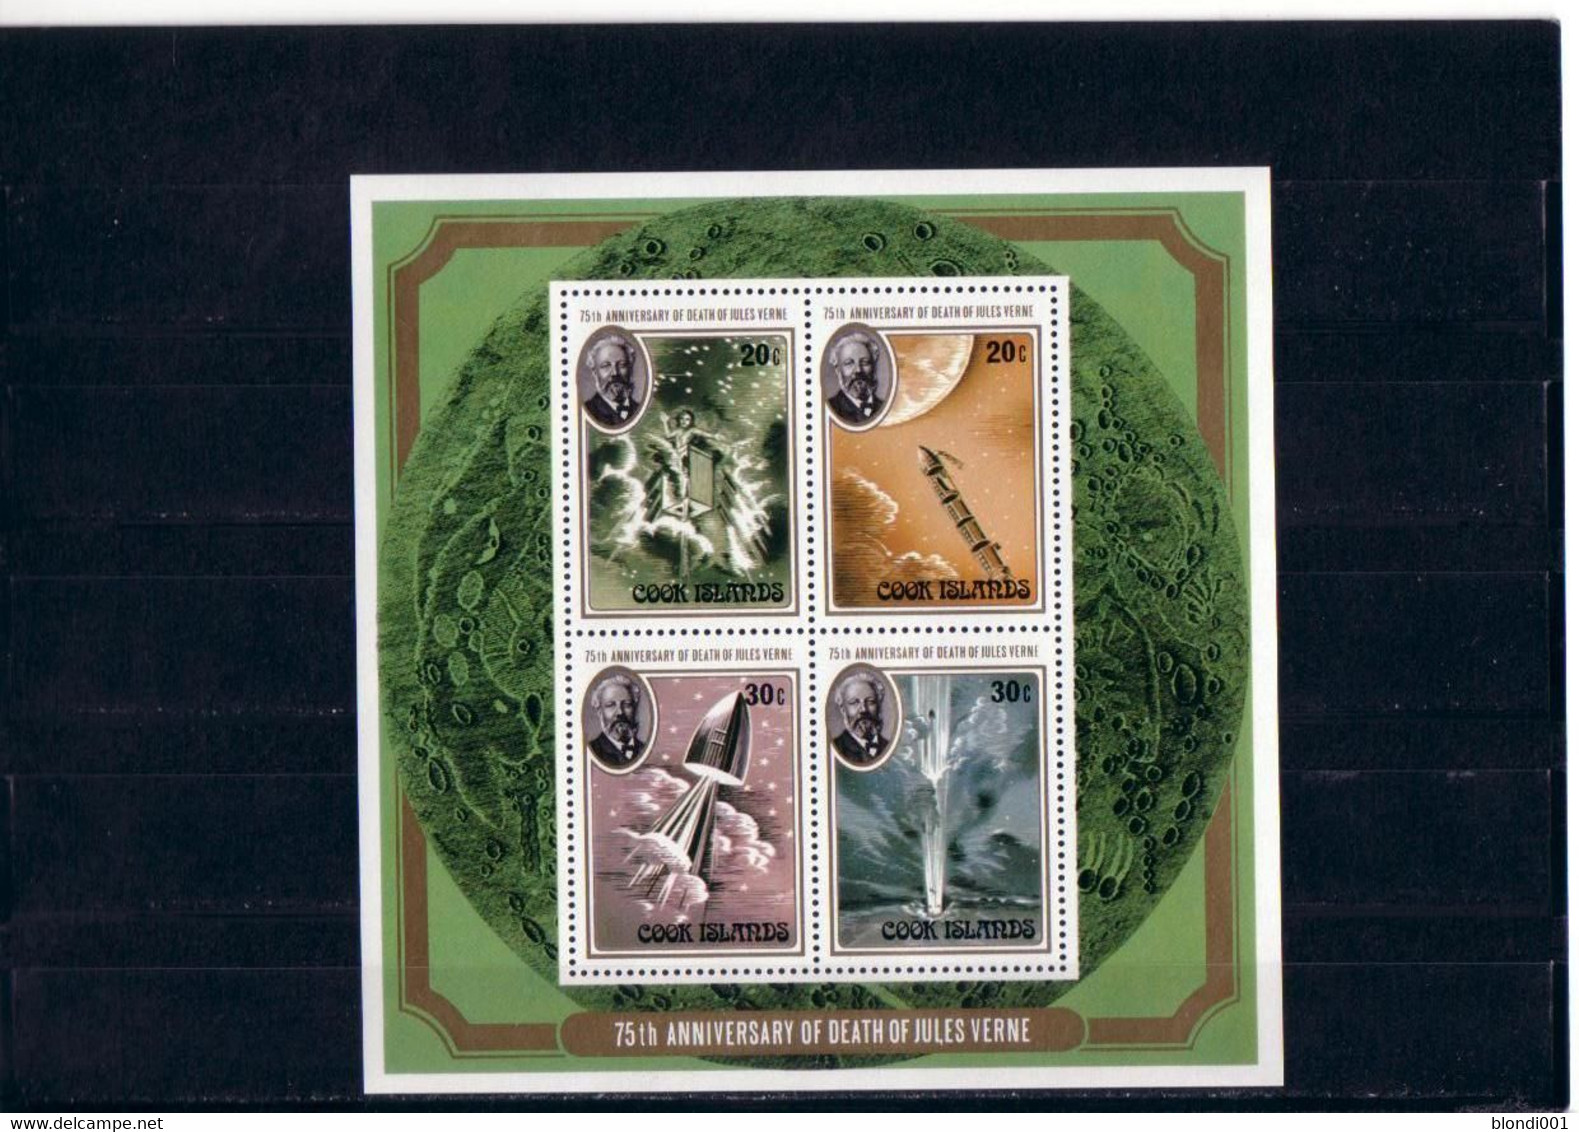 SPACE - COOK ISLANDS - Sheet MNH - Collections